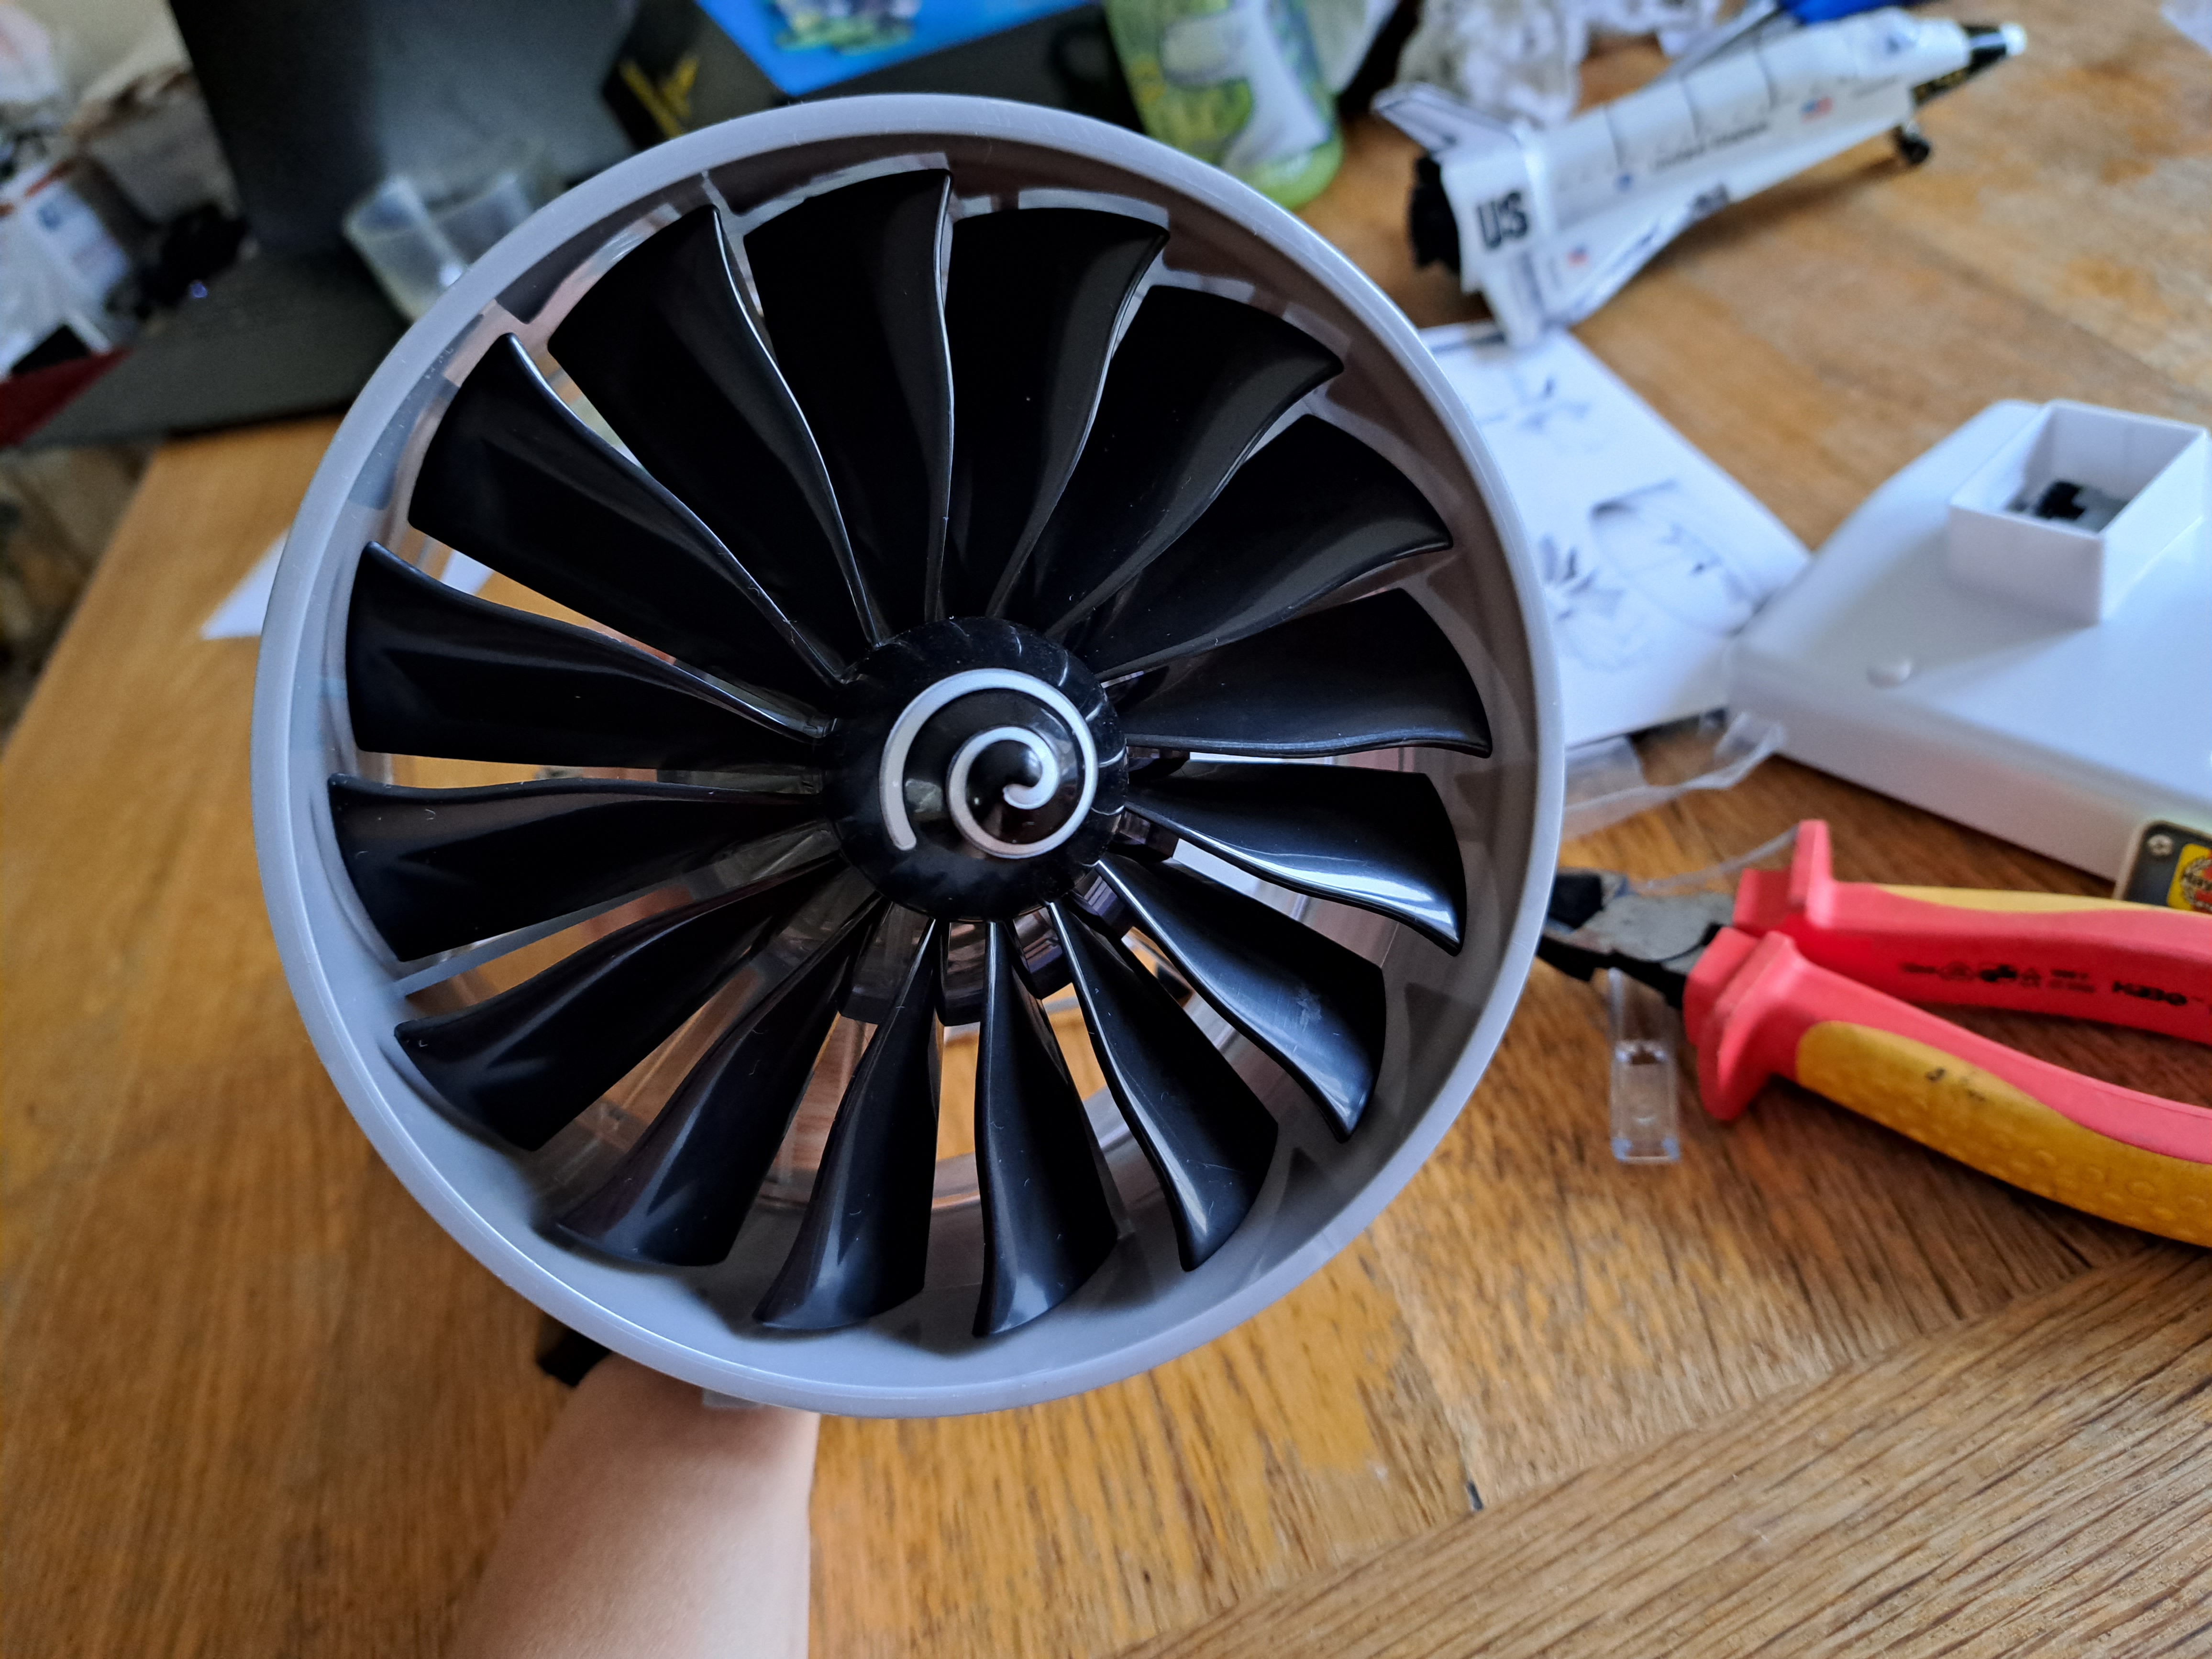 Fan Blades and Housing Done